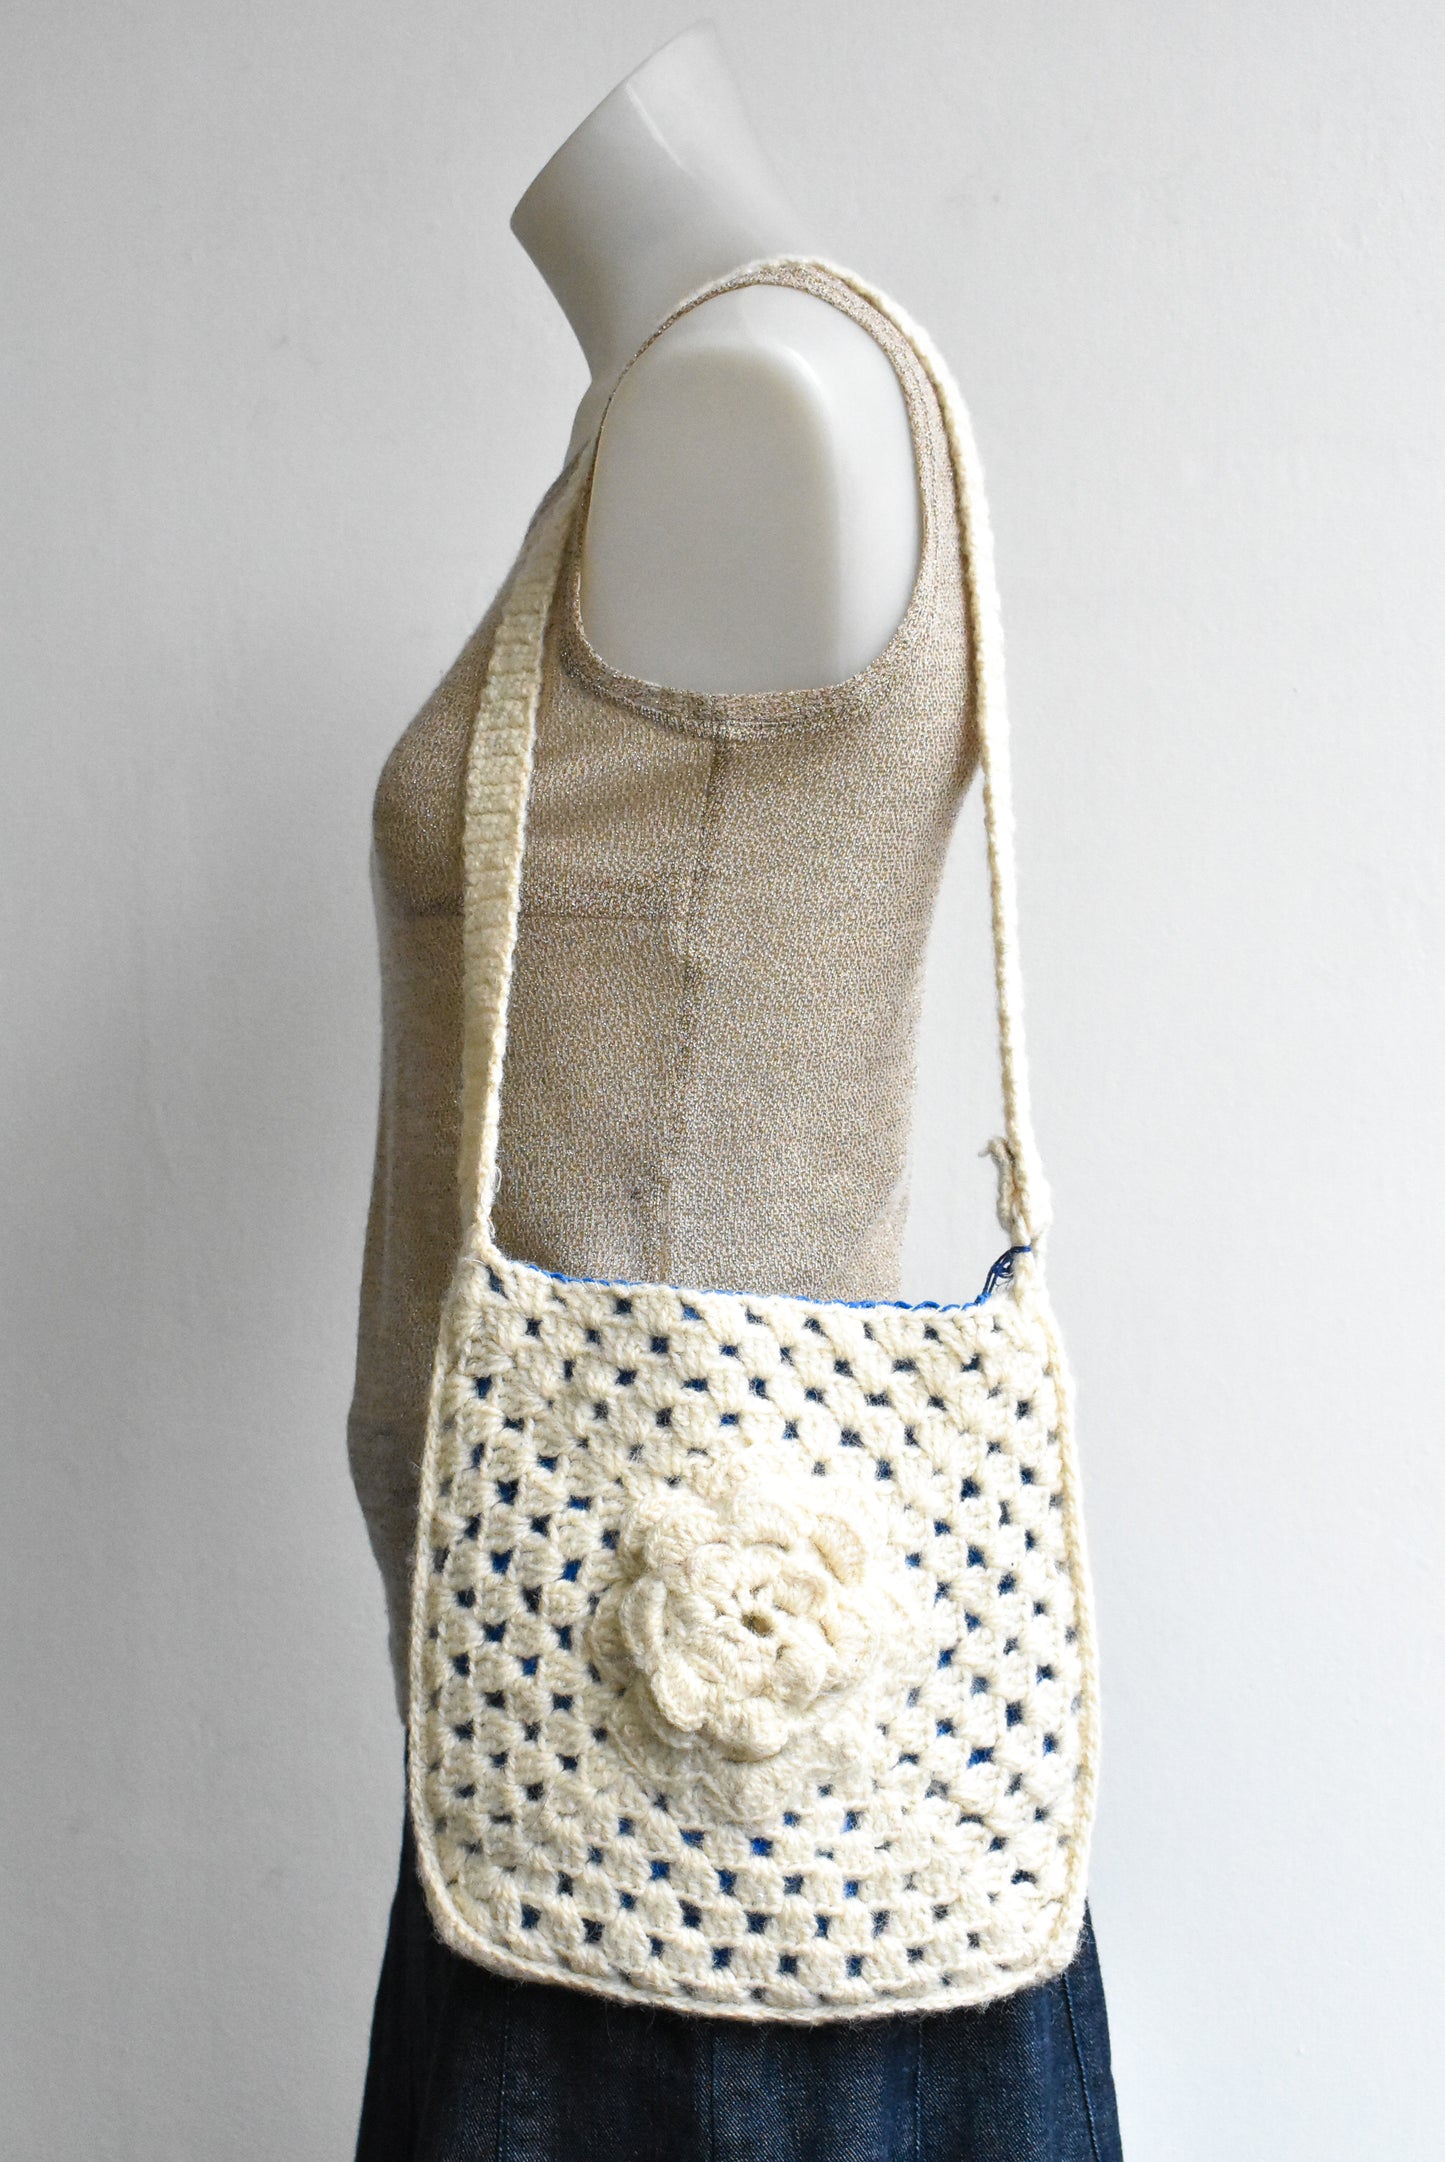 Handcrafted crochet bag with adjustable strap